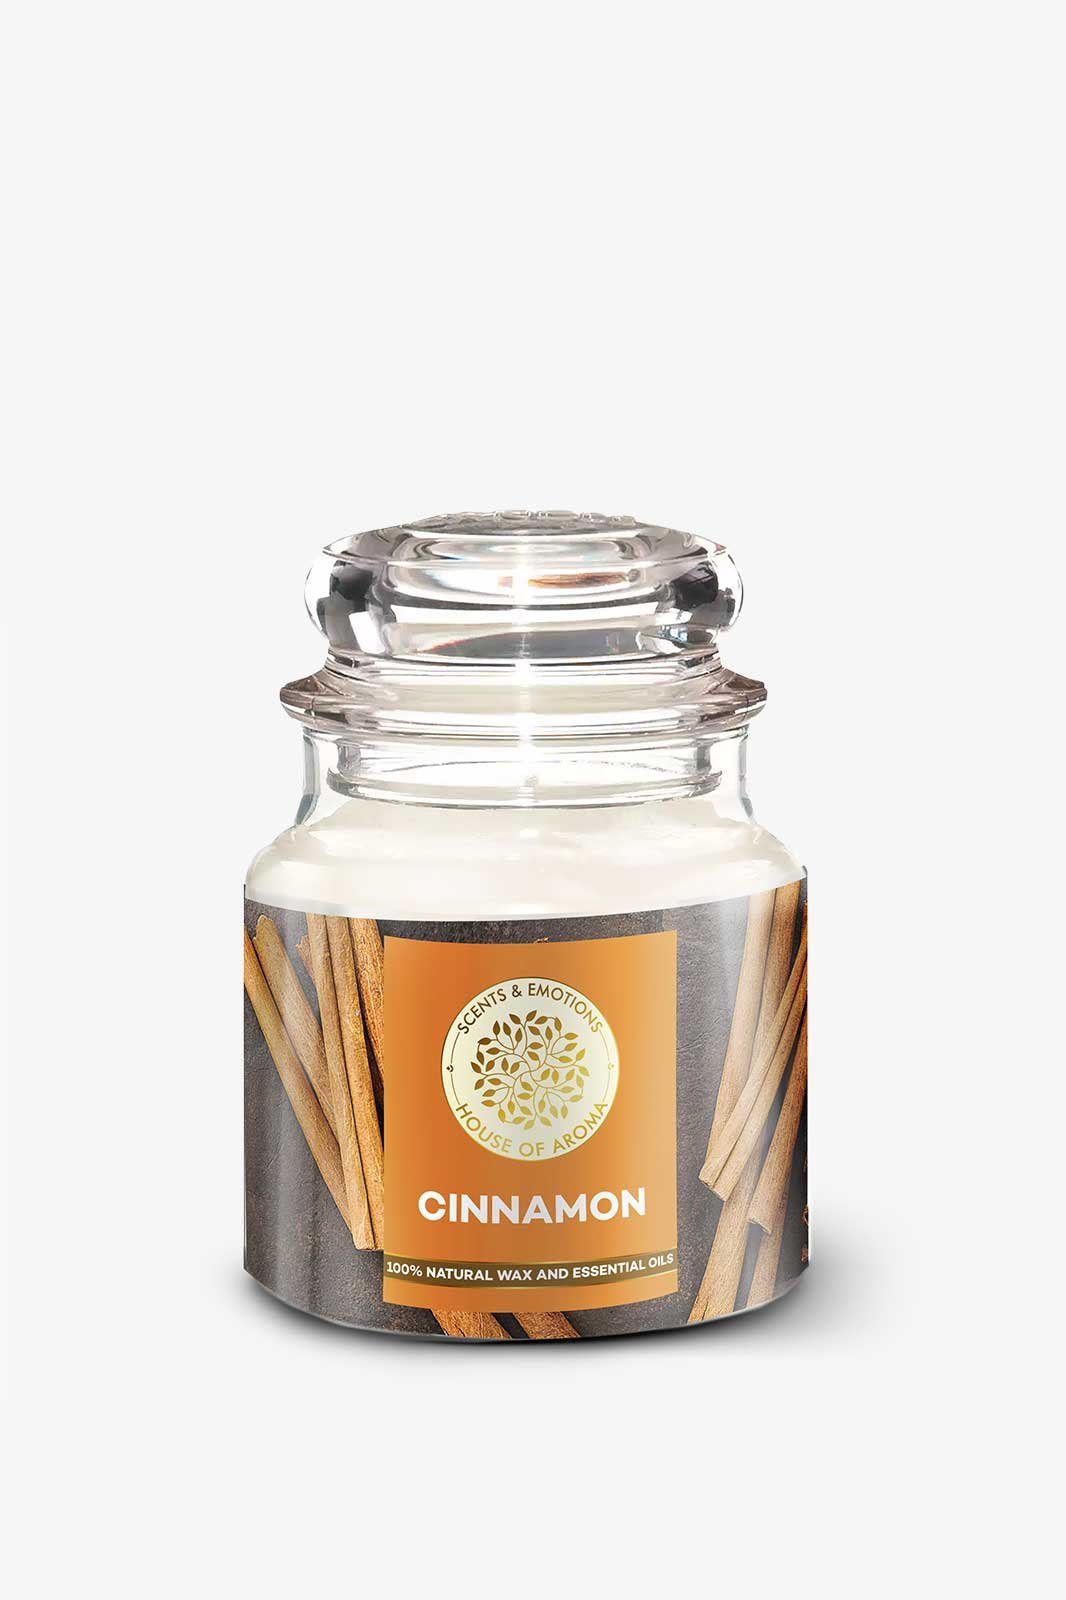 Cinnamon Natural Scented Candle, Cinnamon aromatherapy candle, Essential oil candles, beeswax candles, Cinnamon candle fragrance, cinnamon essential oil candles, essential oil, pure essential oil, organic essential oil, essential oils for hair, essential oil diffuser, essential oil for hair, essential oils for skin, diffuser with essential oil, essential oil for hair growth, essential oil benefits, essential oil how to use, essential oil for skin whitening, essential oil for headache, essential oil benefits for skin, essential oil plants, essential oil for anxiety, essential oil room freshener, essential oil brands in india, essential oil air freshener, essential oils brands, best essential oil, essential oil gift set, best essential oils brands, best essential oil for glowing skin, best essential oils for hair growth in india, best, essential oil brands in india, best essential oils for skin, essential oil best brands, the best essential oil brands, best essential oil brands, the best essential oil diffuser, best essential oil diffuser, best essential oils for skin tightening, best essential oil for oily skin, best essential oil for dry skin, essential oil brands in india, best essential oil for hair fall, best essential oil for dandruff, best essential oil for anxiety, best essential oil home fragrance, pure essential oil candles, organic essential oil set